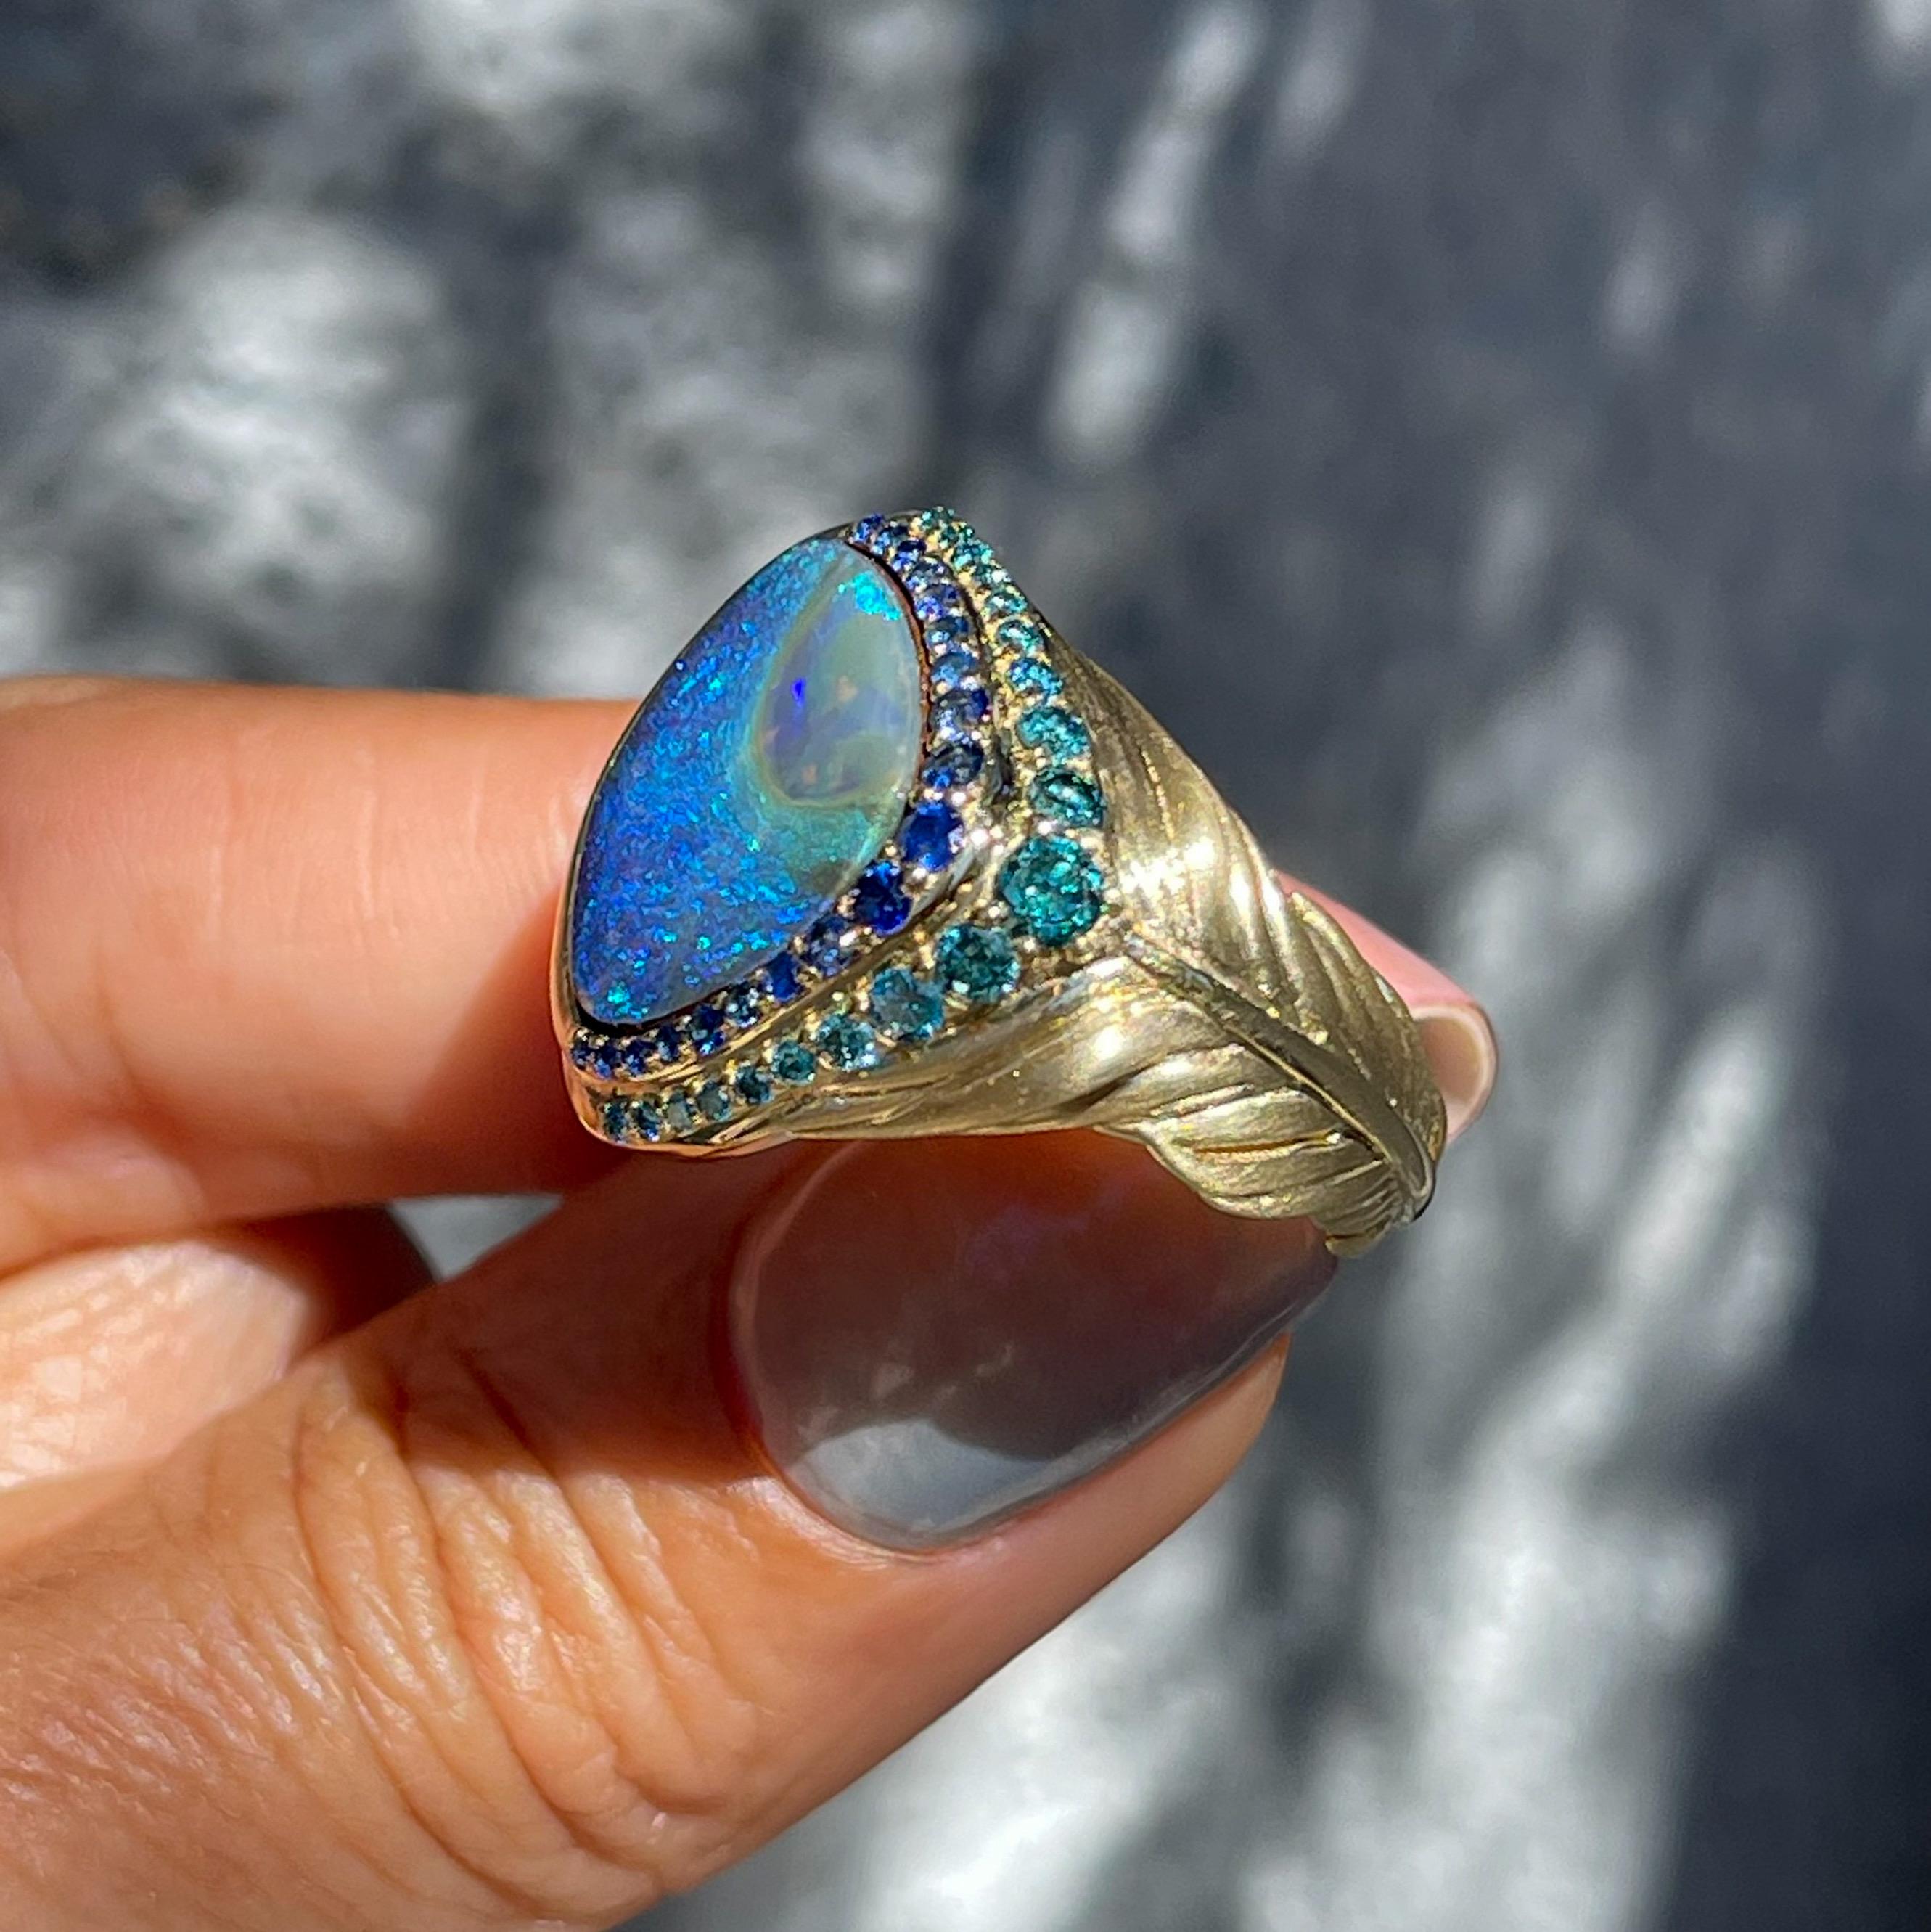 A striking boulder opal in peacock hues flashes from this Australian Opal Ring. Set in 14k gold with sapphires and diamonds, its display of colors is phenomenal. From the eyespot of the blue opal plume, shimmering cobalt swirls around an abyss of